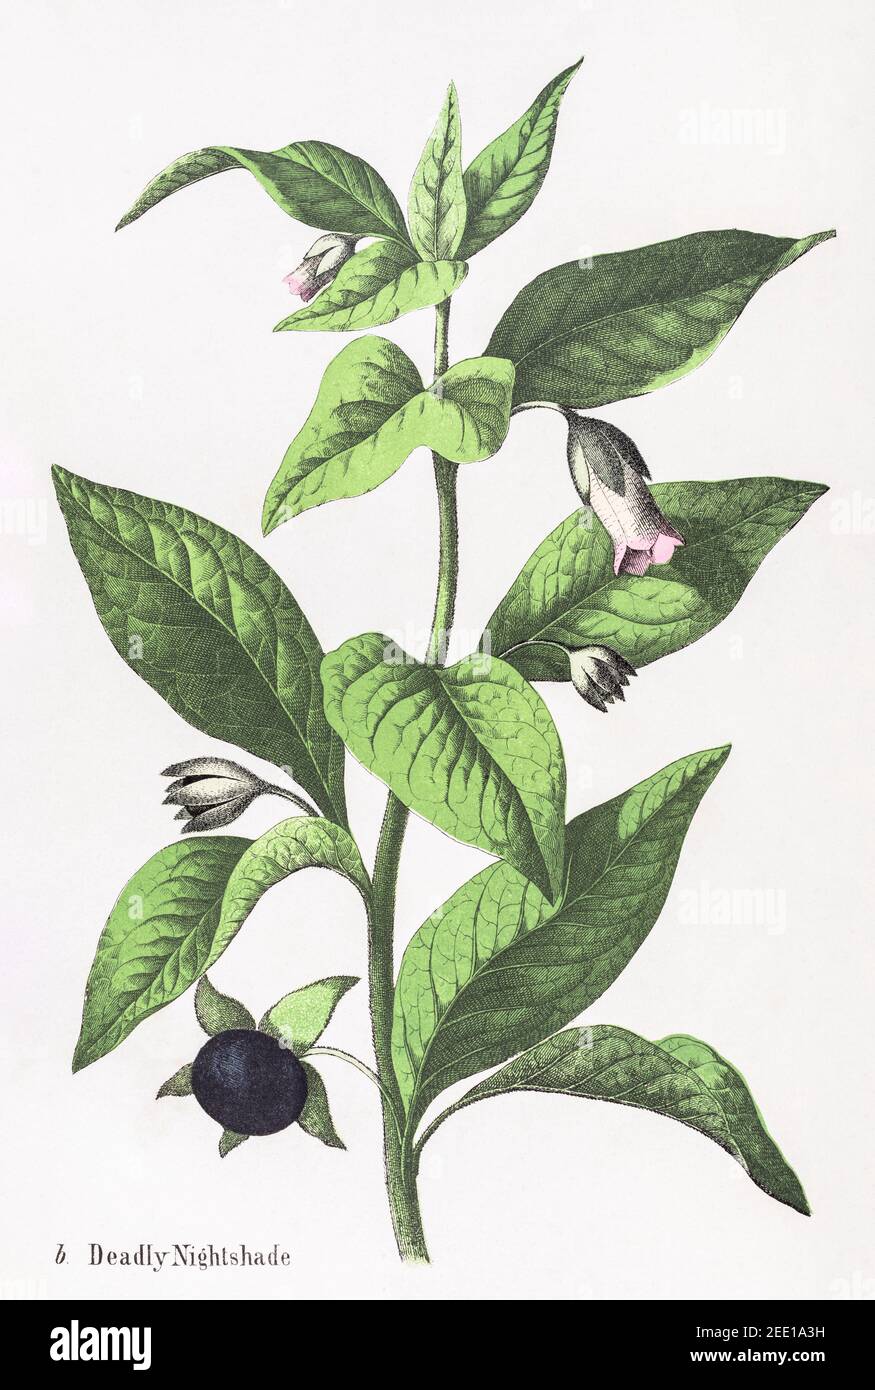 Digitally restored 19th century Victorian botanical illustration of Deadly Nightshade / Atropa belladonna. See notes for source and process info. Stock Photo